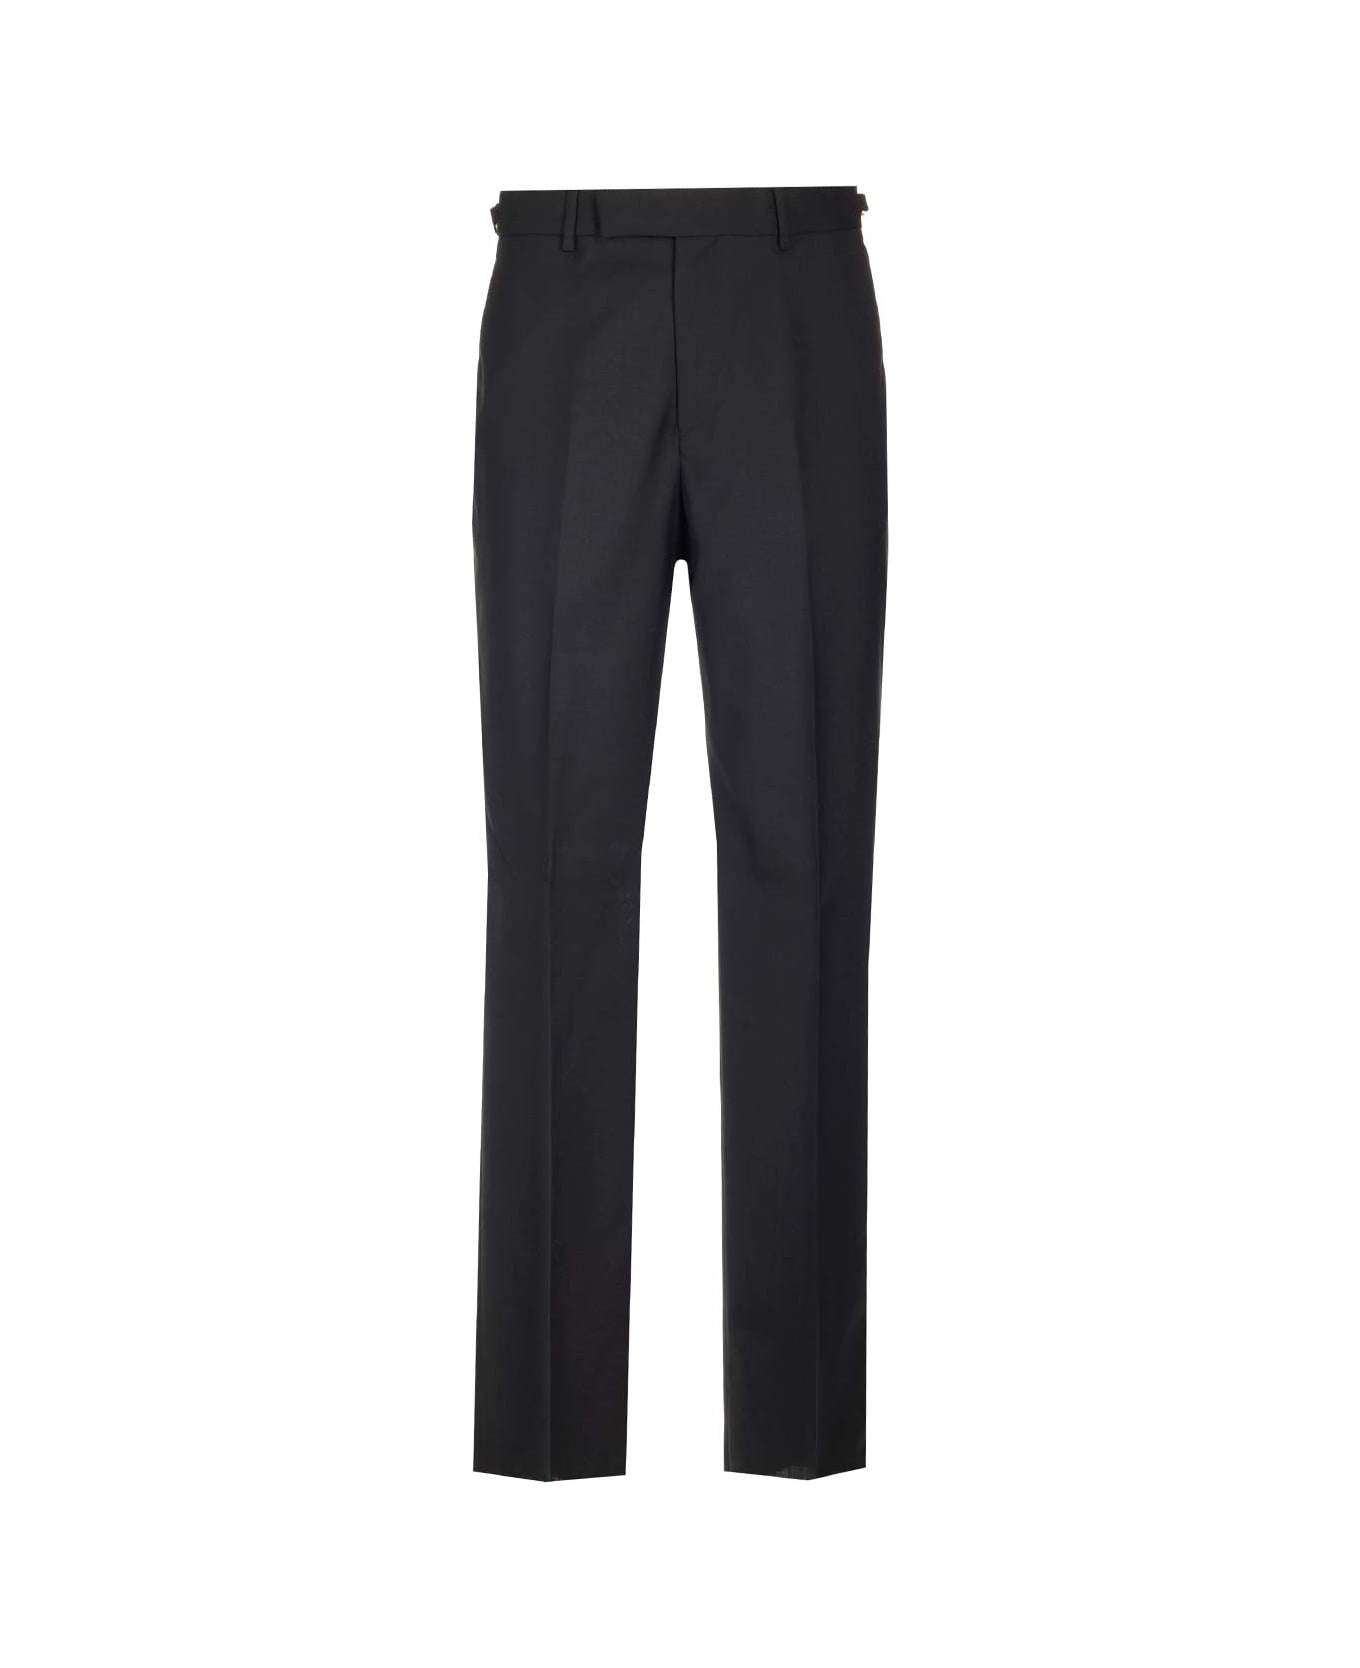 Versace Tailored Wool Trousers - Black